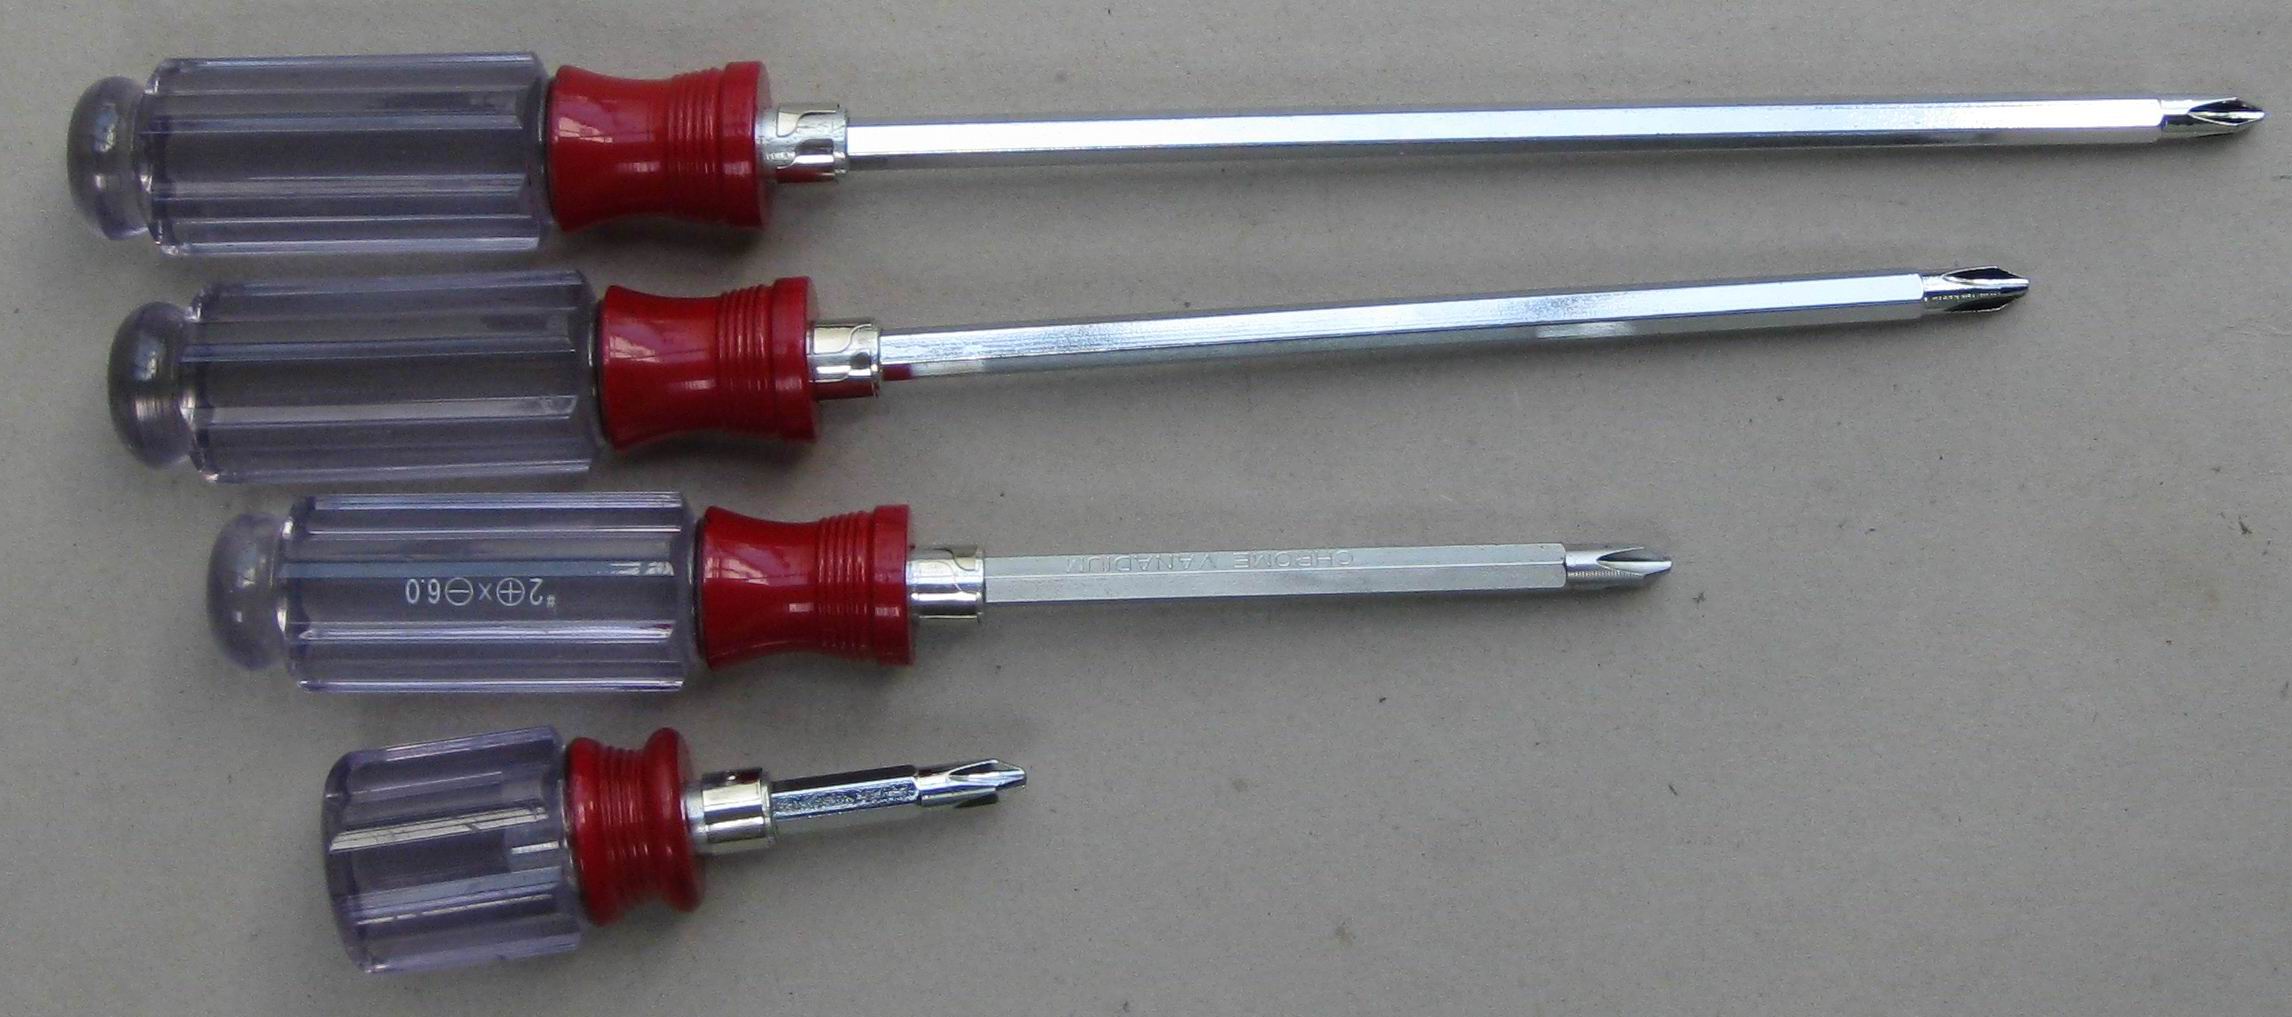 Slotted & Phillip2 way Screwdriver with PVC Handle (P9806)